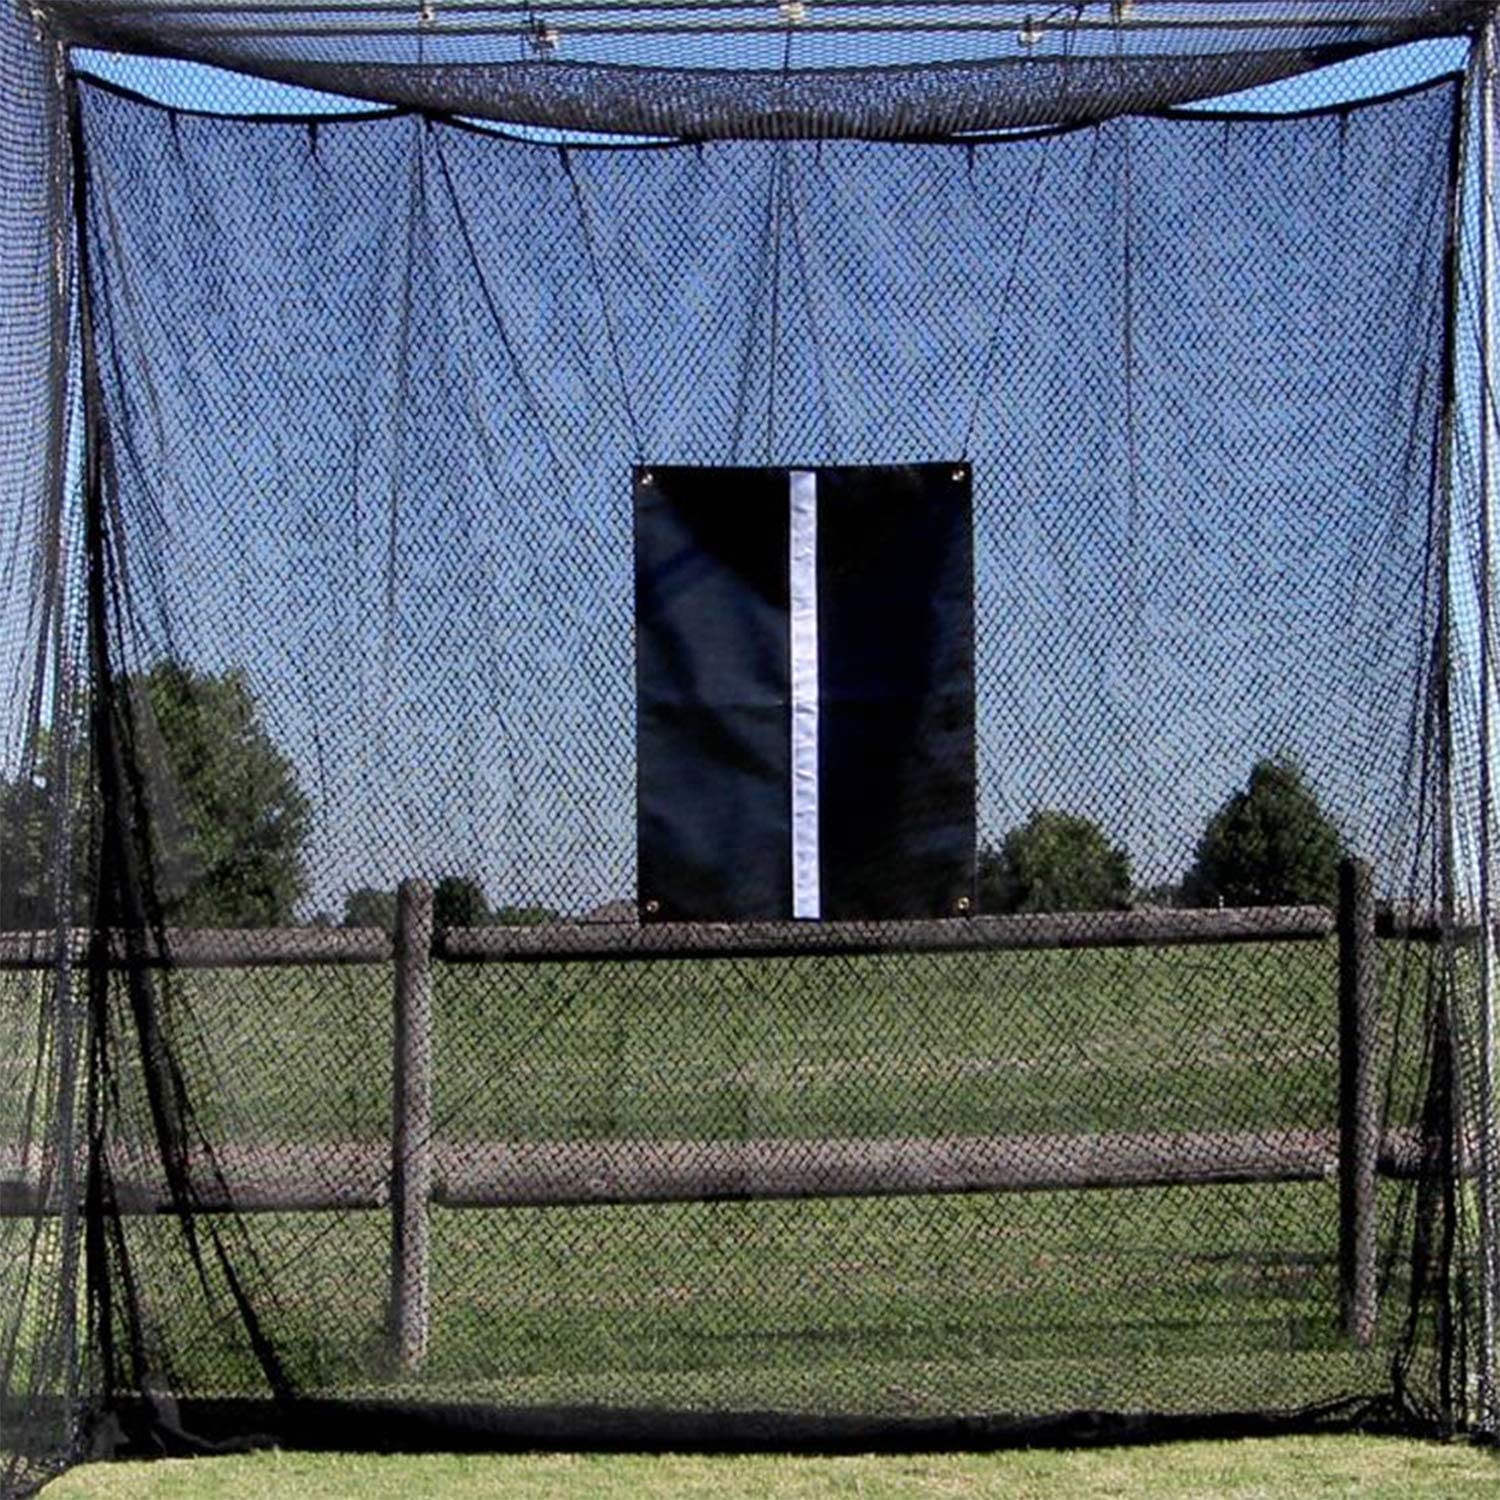 Cimarron Masters Golf Net with Frame Corners Reviews & Sale Price - Best  Indoor Golf Simulator & Launch Monitor Reviews, Price with Discount Code